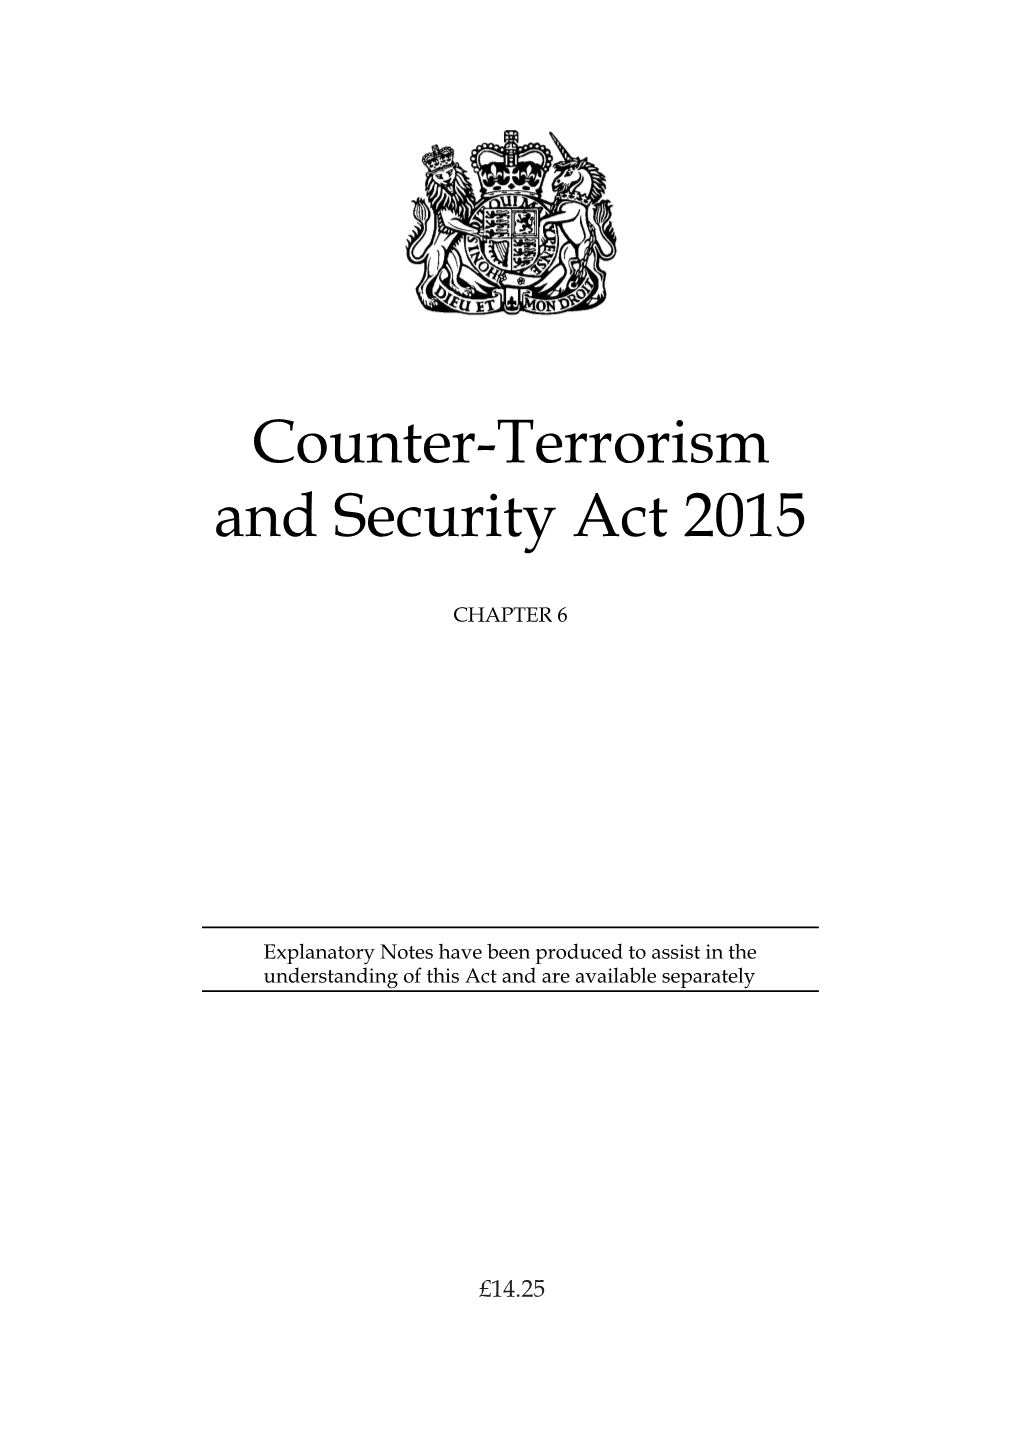 Counter-Terrorism and Security Act 2015